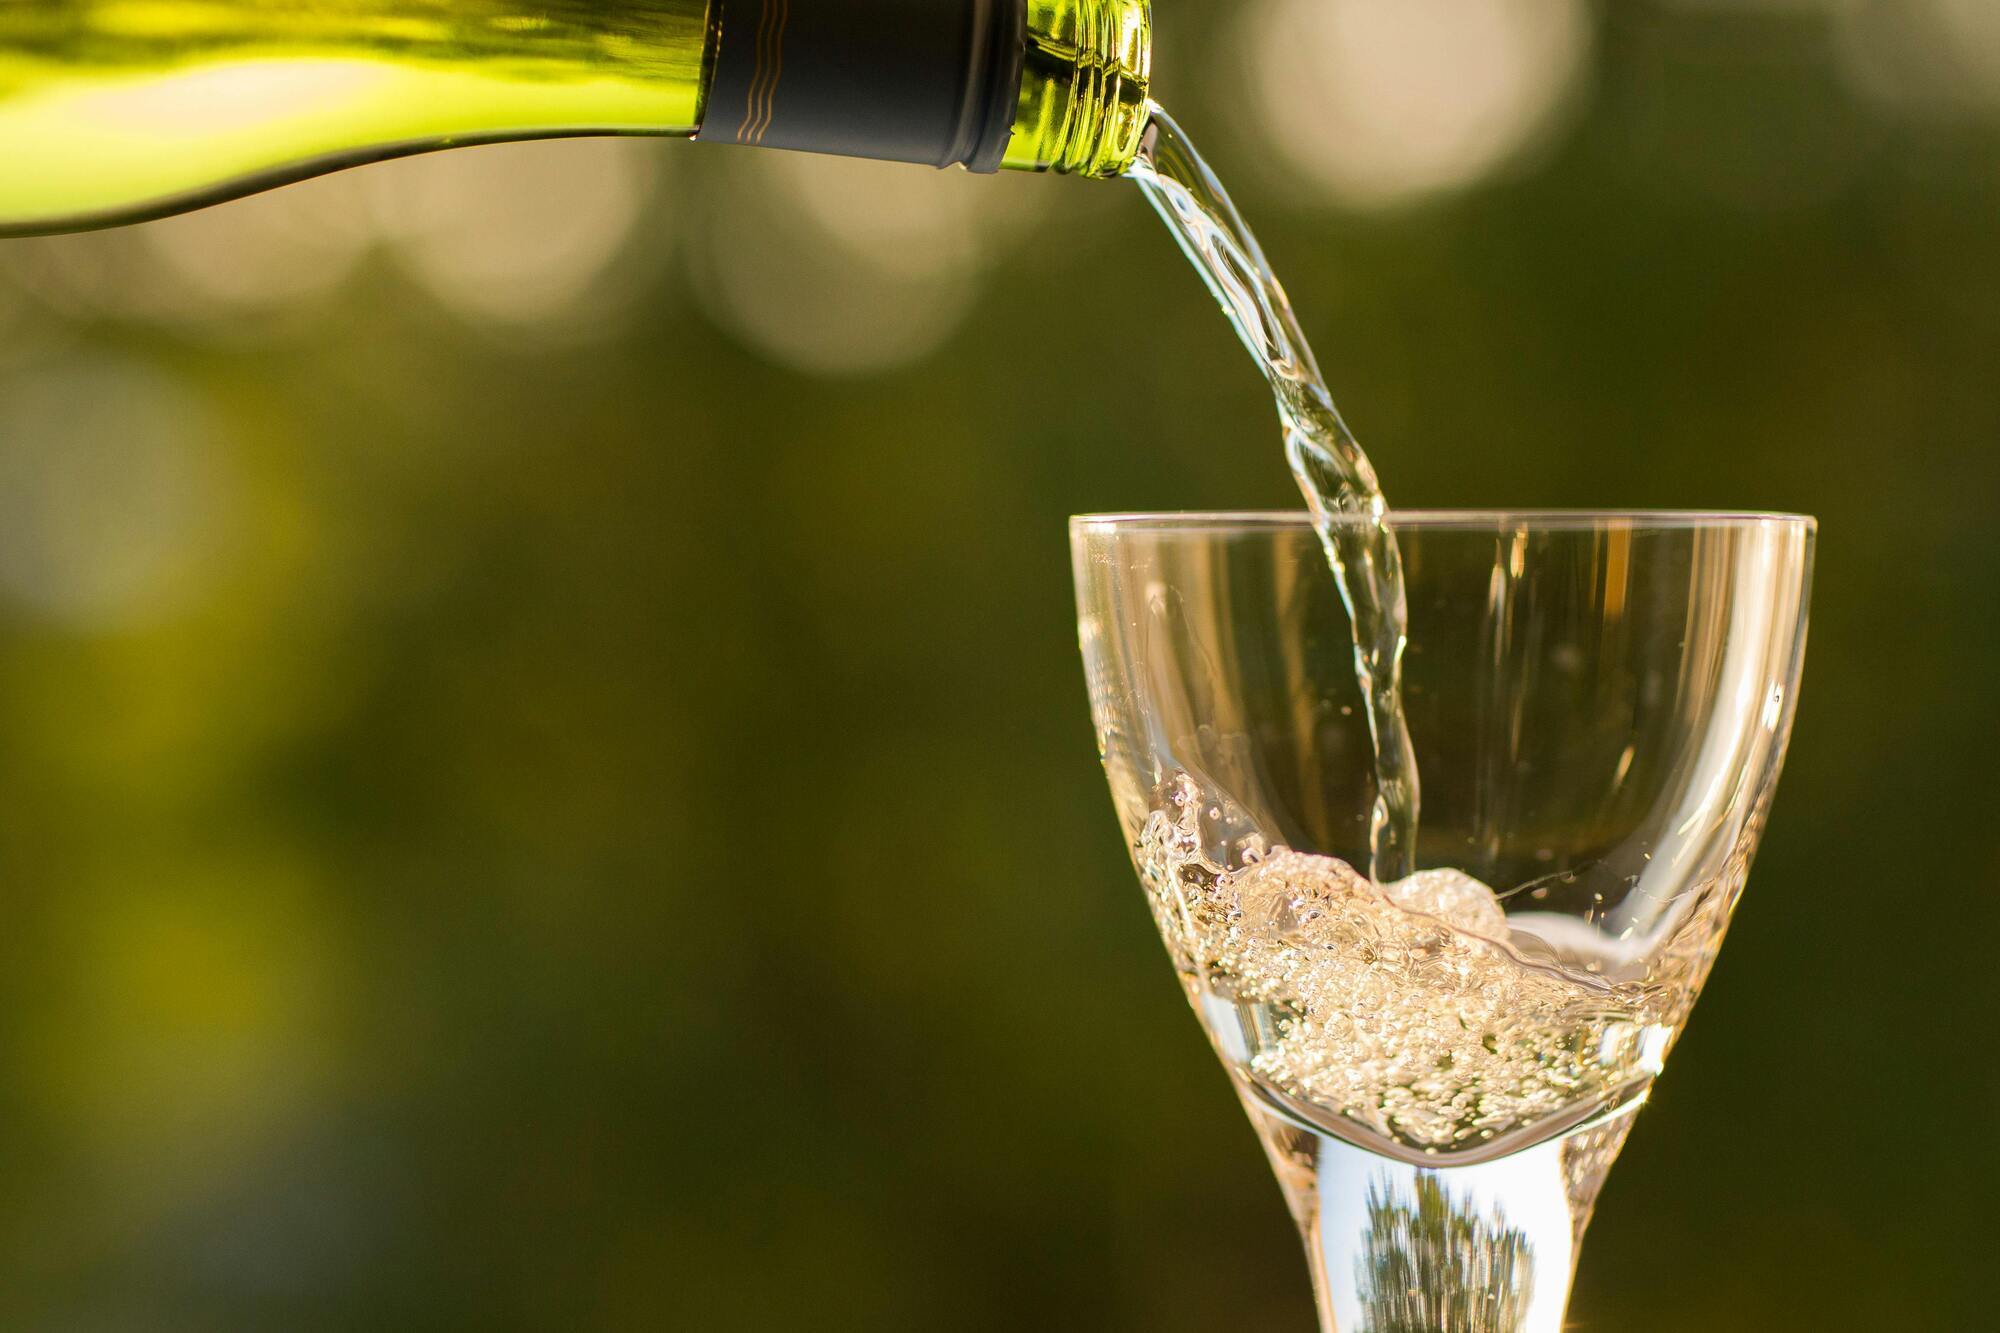 You've always served wine incorrectly: an expert talks about the 20/20 rule